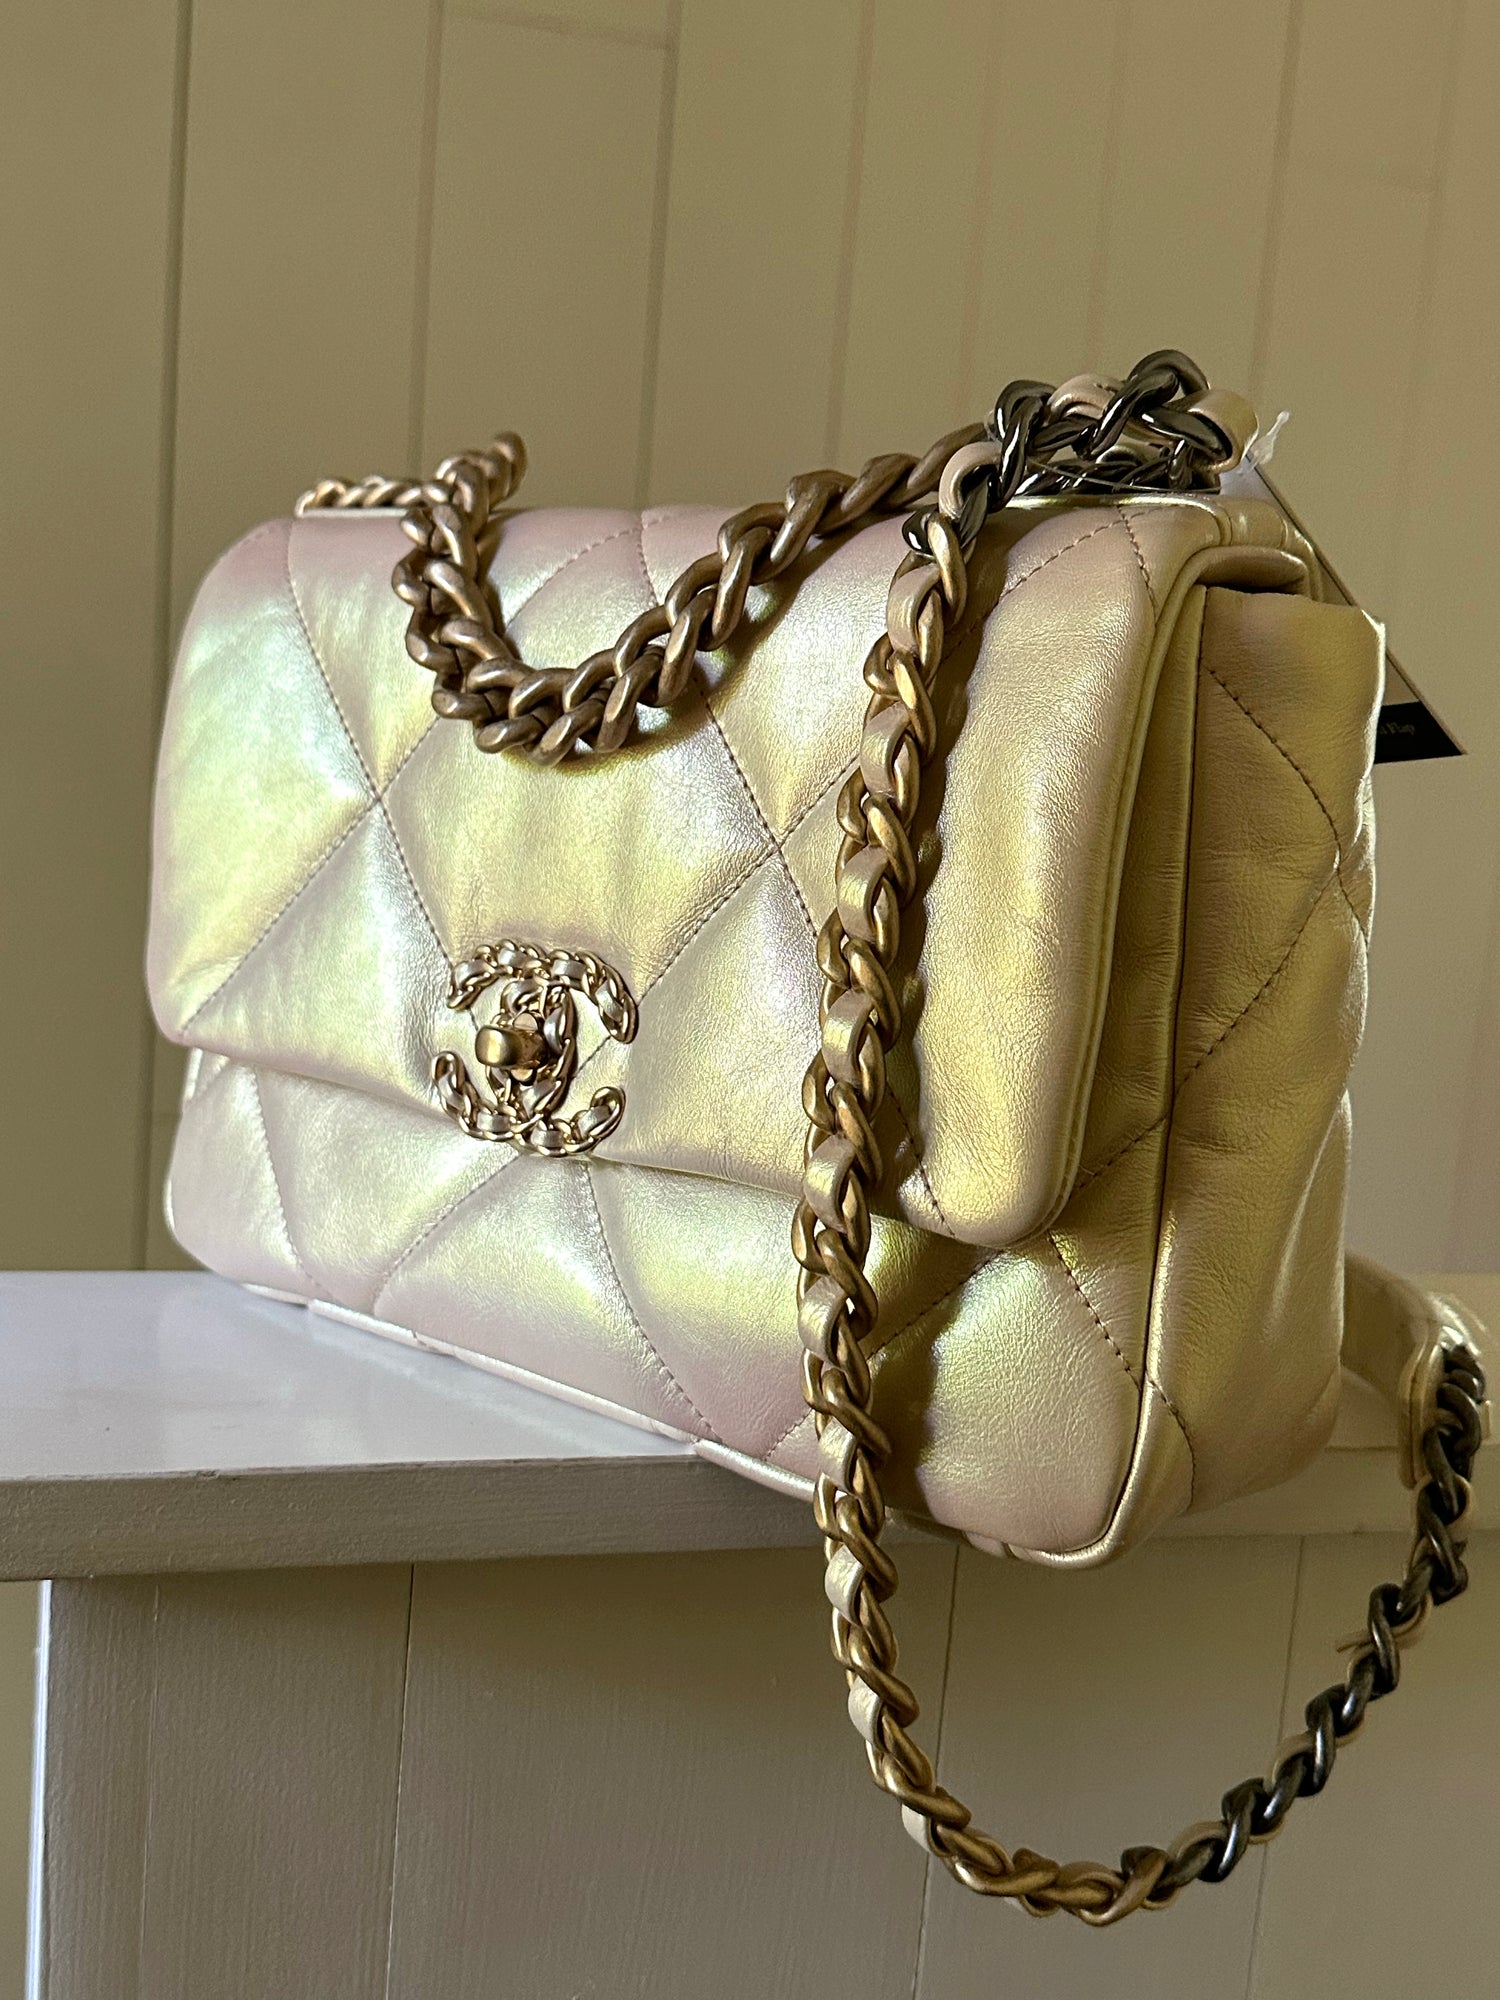 chanel bag white with pearl